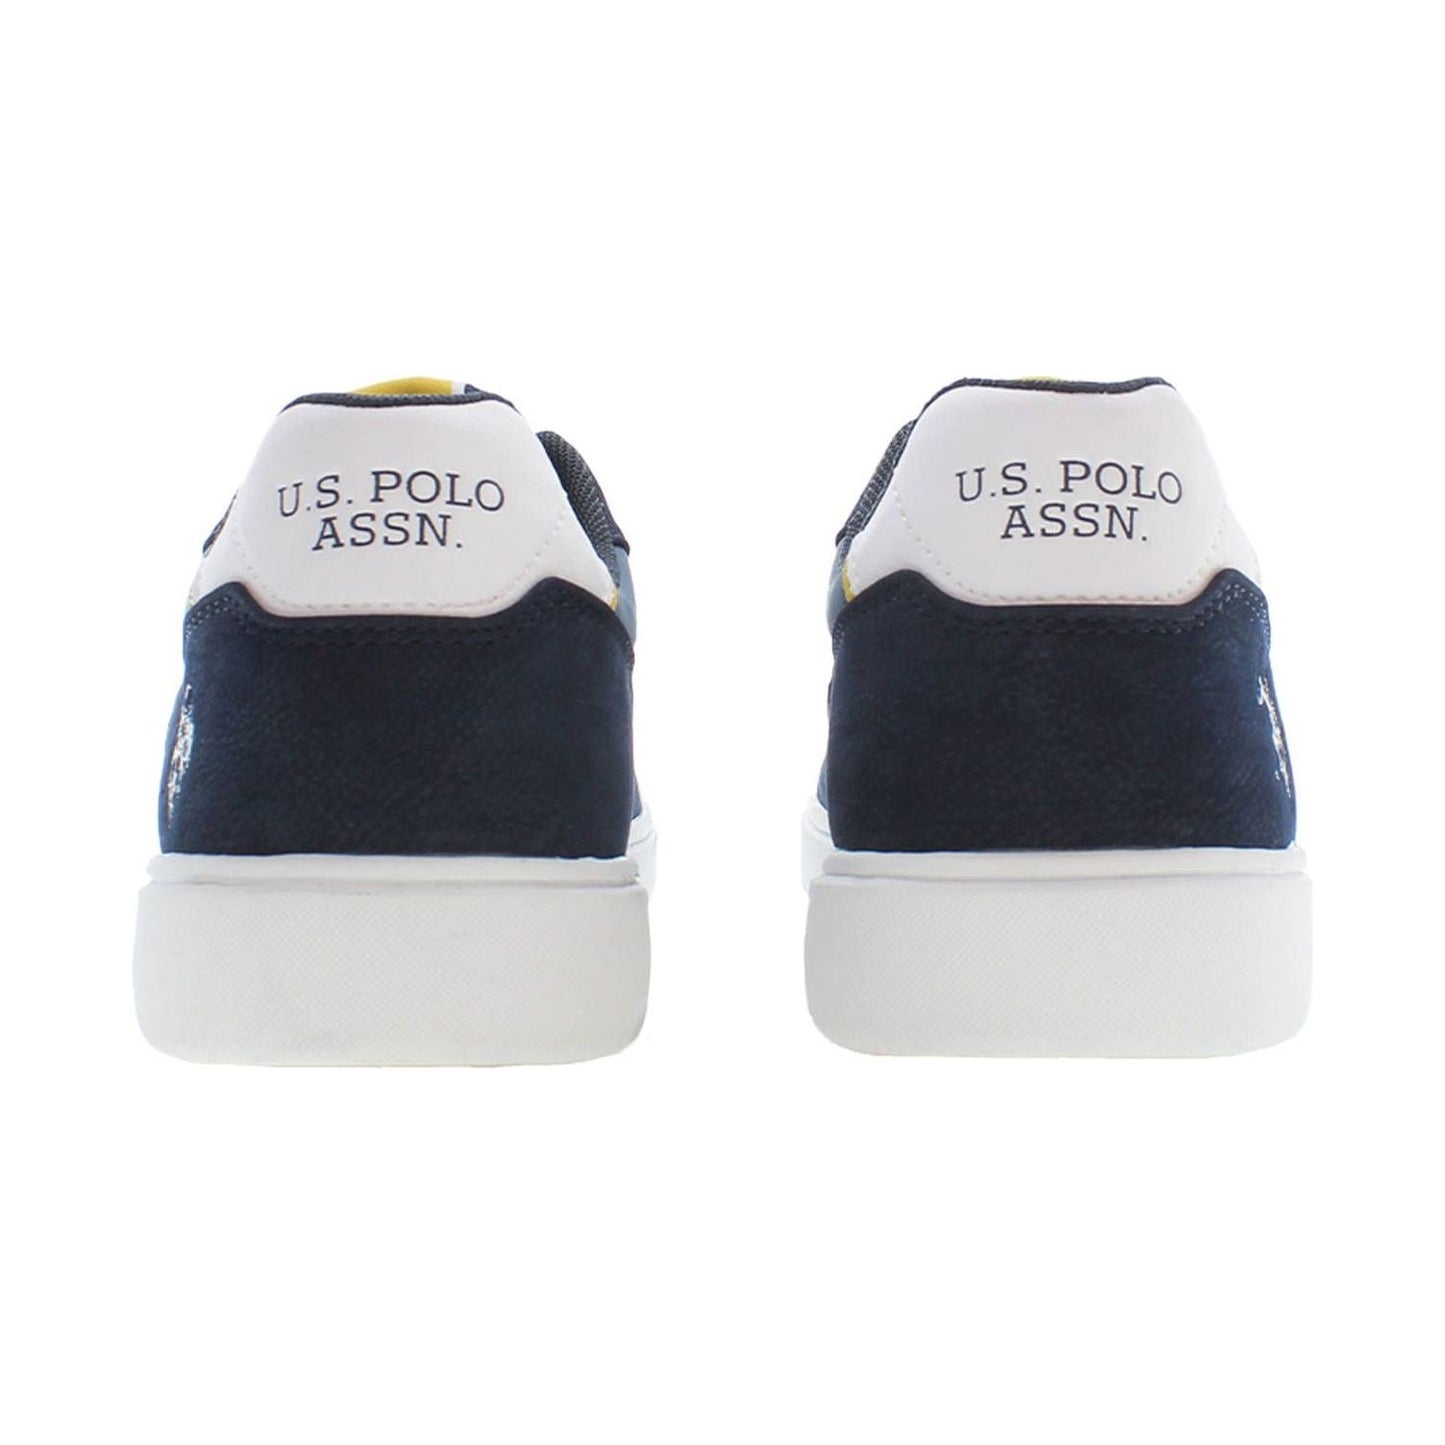 U.S. POLO ASSN. Sleek Blue Sneakers with Contrasting Details sleek-blue-sneakers-with-contrasting-details-1